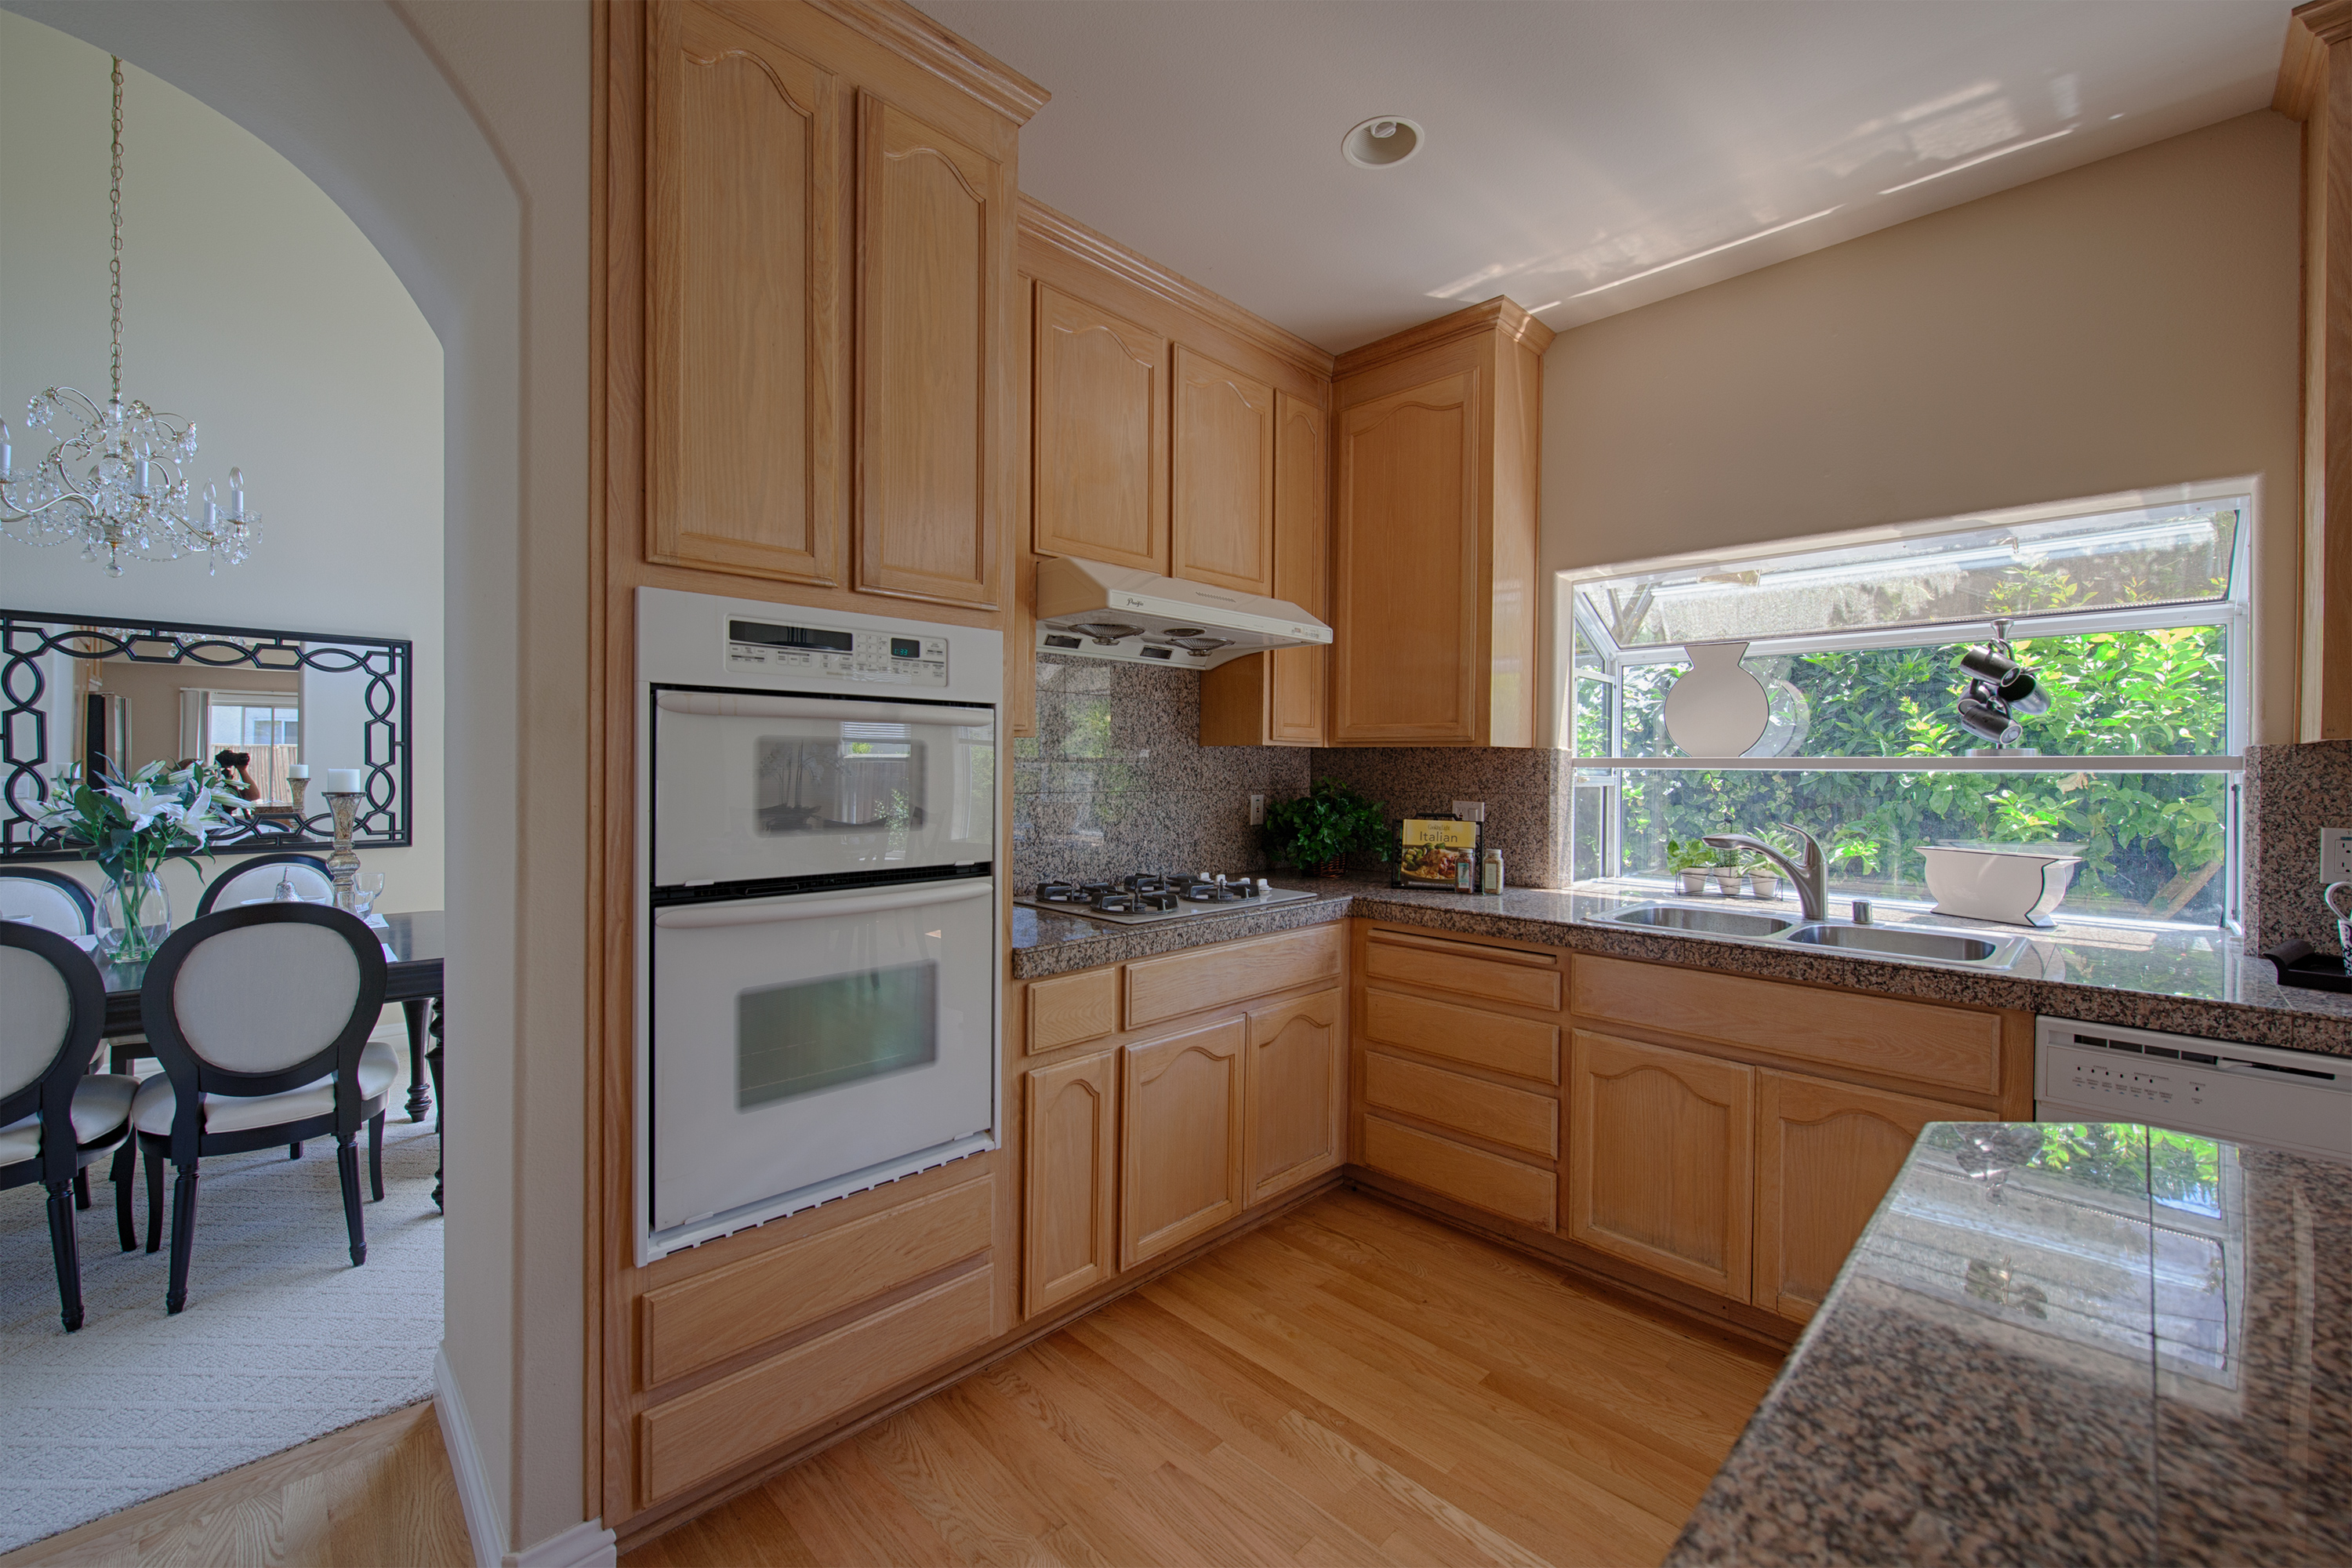 19050 Pendergast Ave, Cupertino 95014 - Kitchen (A)